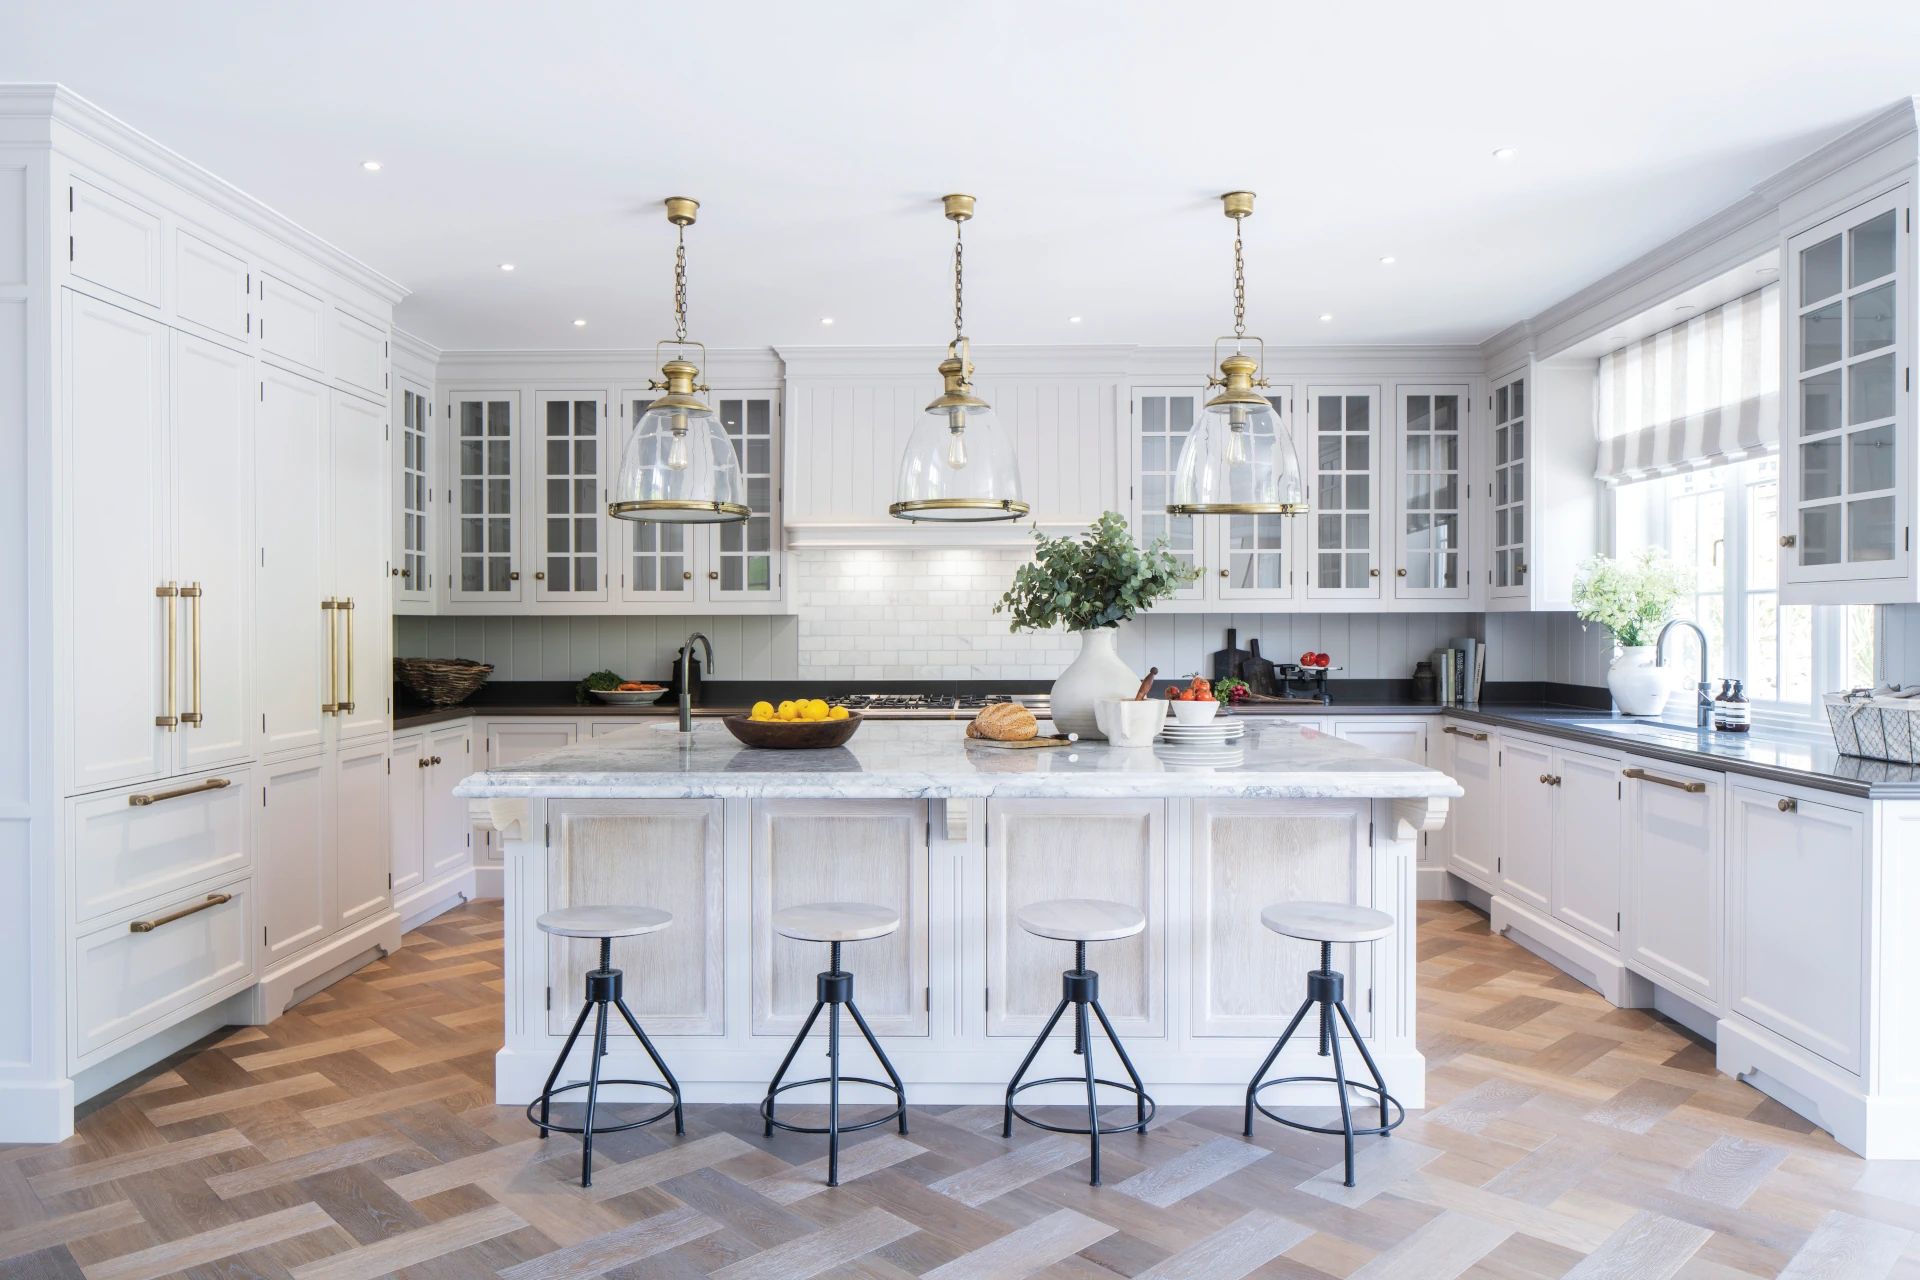 Classic Edwardian kitchen with marble topped island and brass handles and knobs.